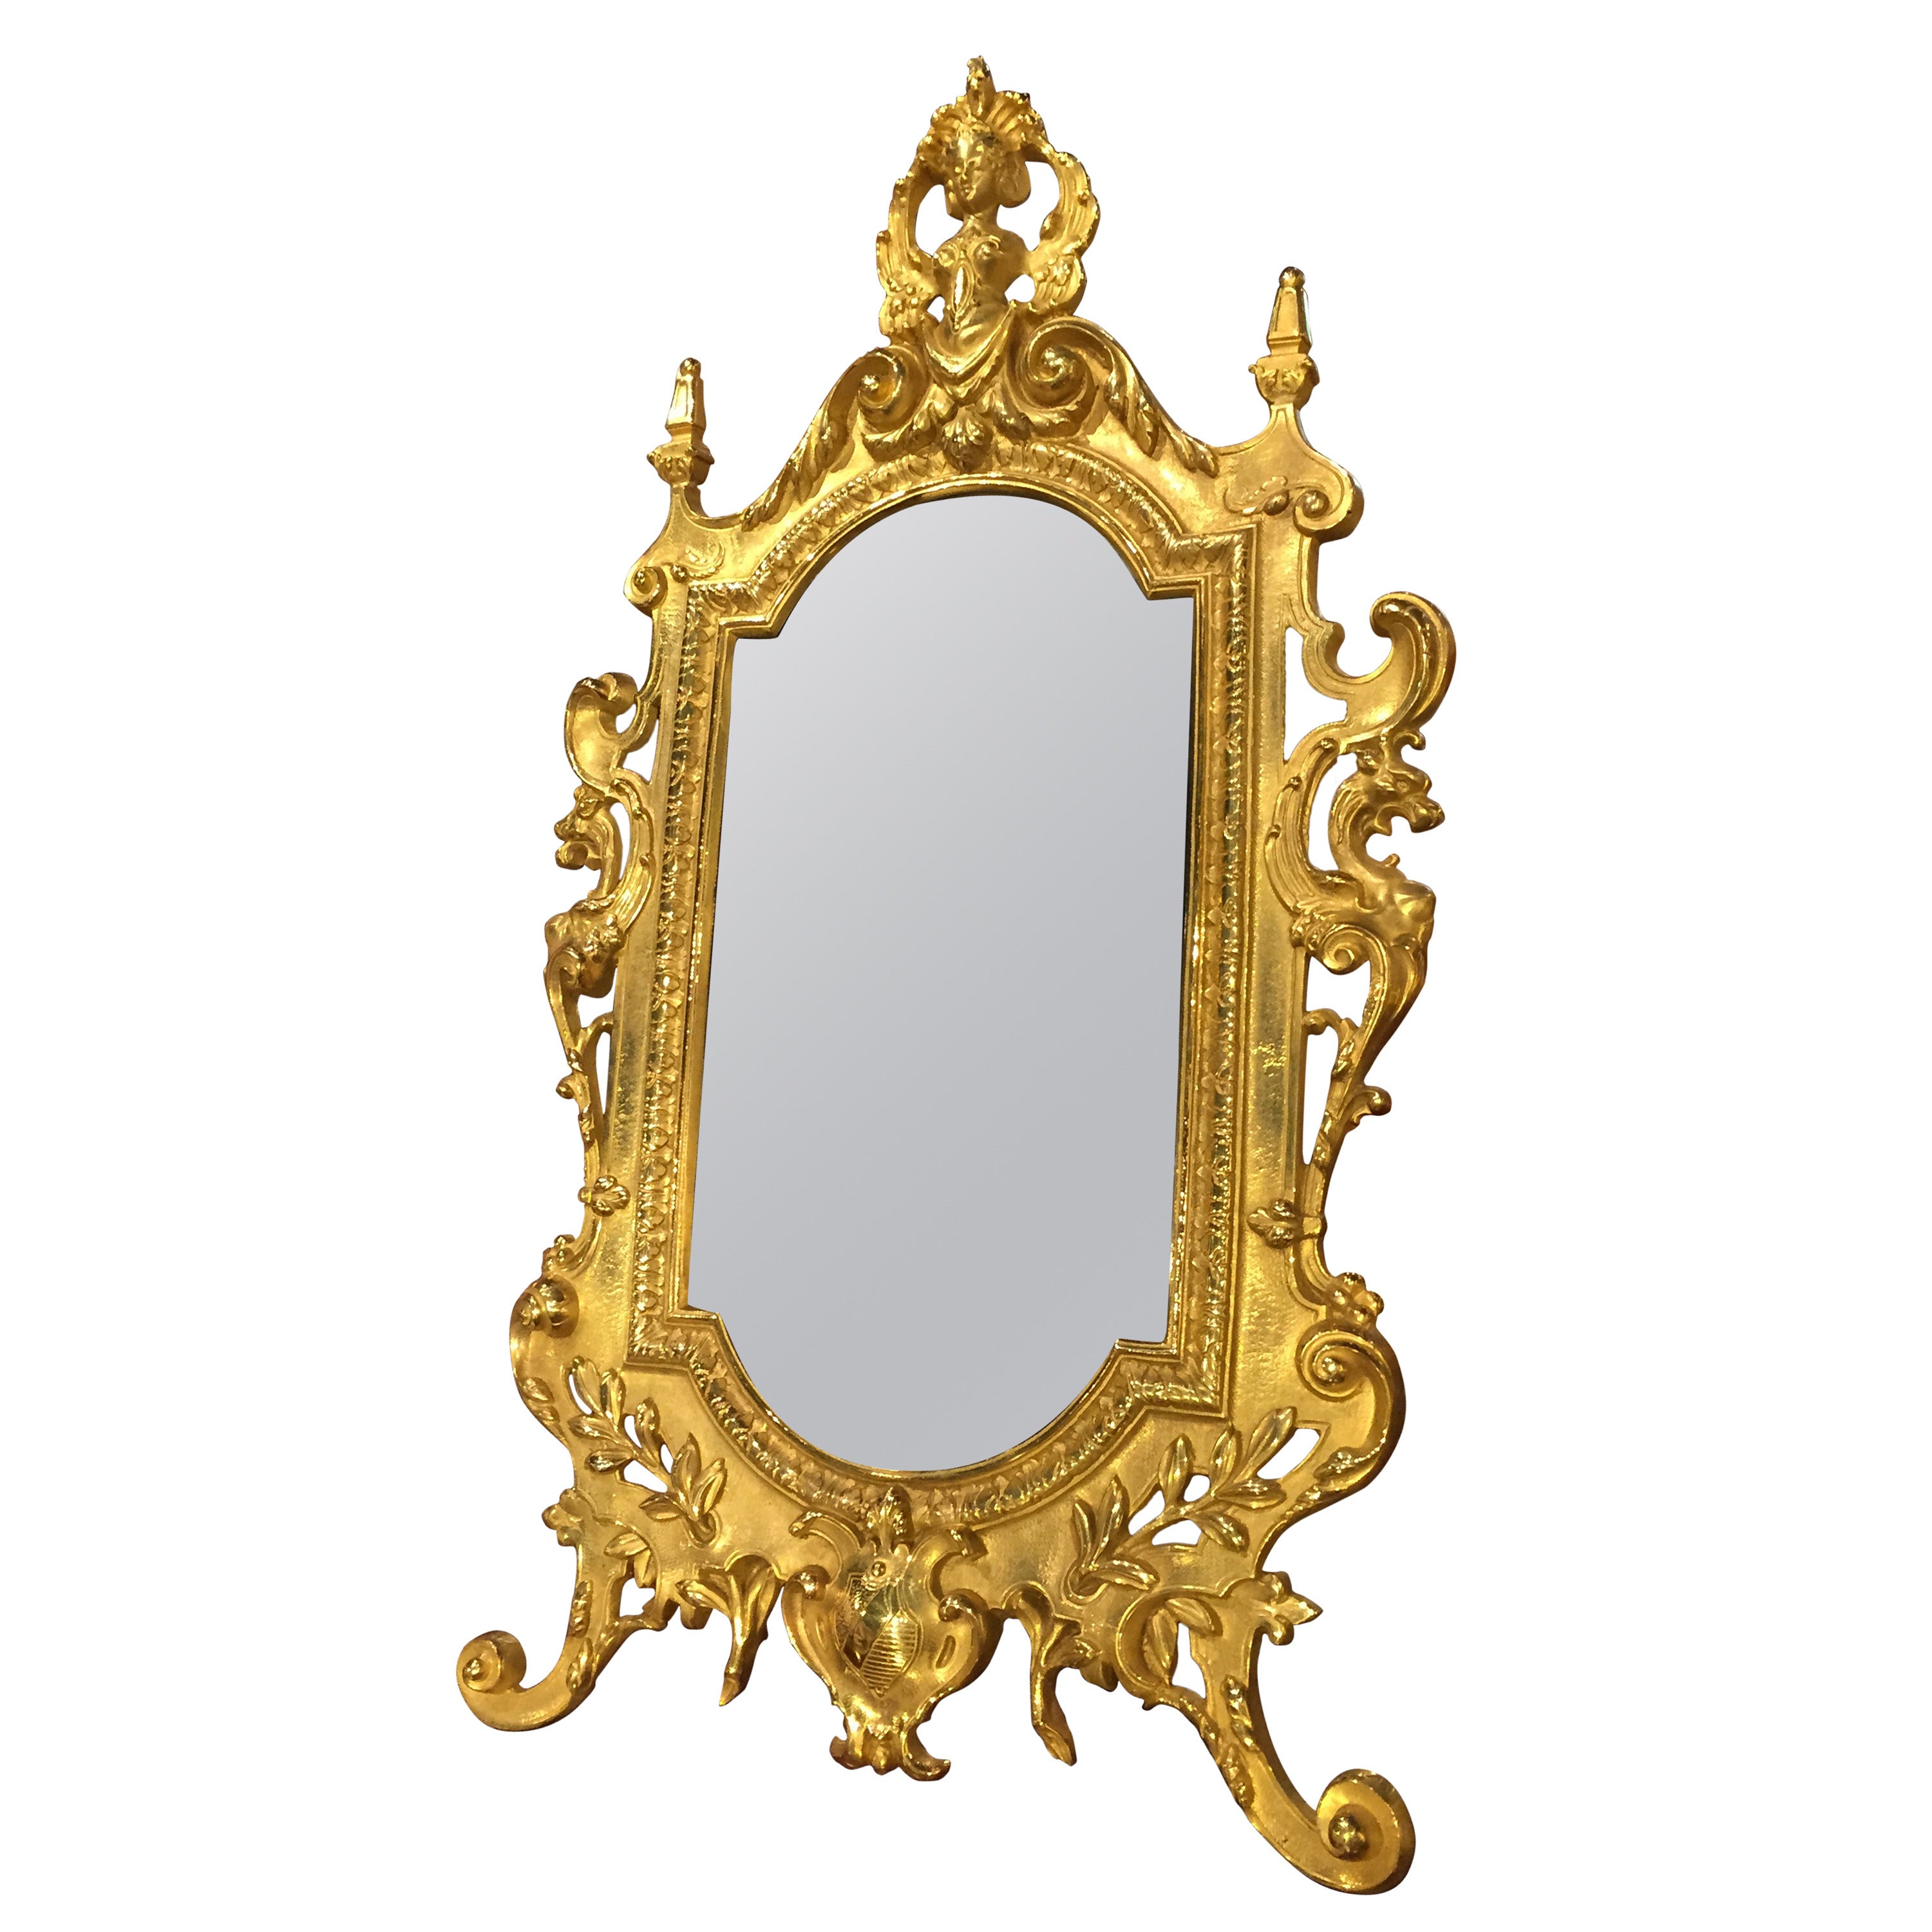 Antique Bronze Table Mirror from France, Period Napoleon III